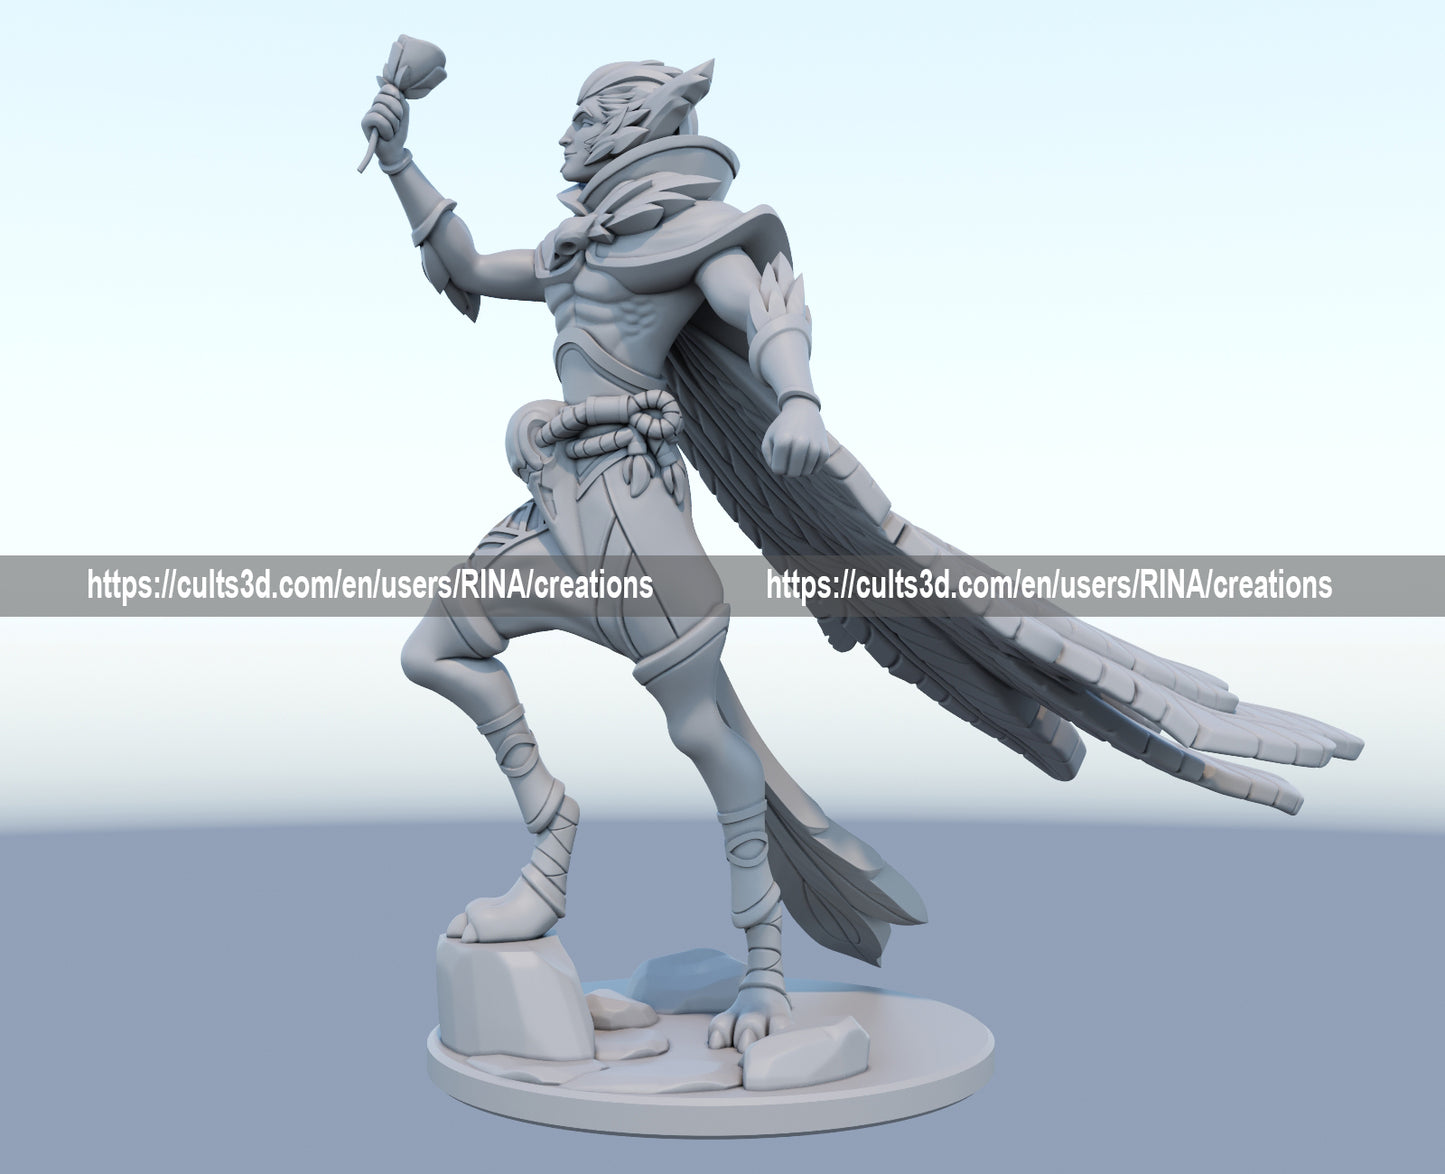 Rakan 3D-printed League of Legends champion figure. Decorate your gaming setup or home with your favorite League of Legends champion! Choose between the unpainted version, perfect for you to paint yourself, or the hand-painted version by a professional painter. Order your figure today!